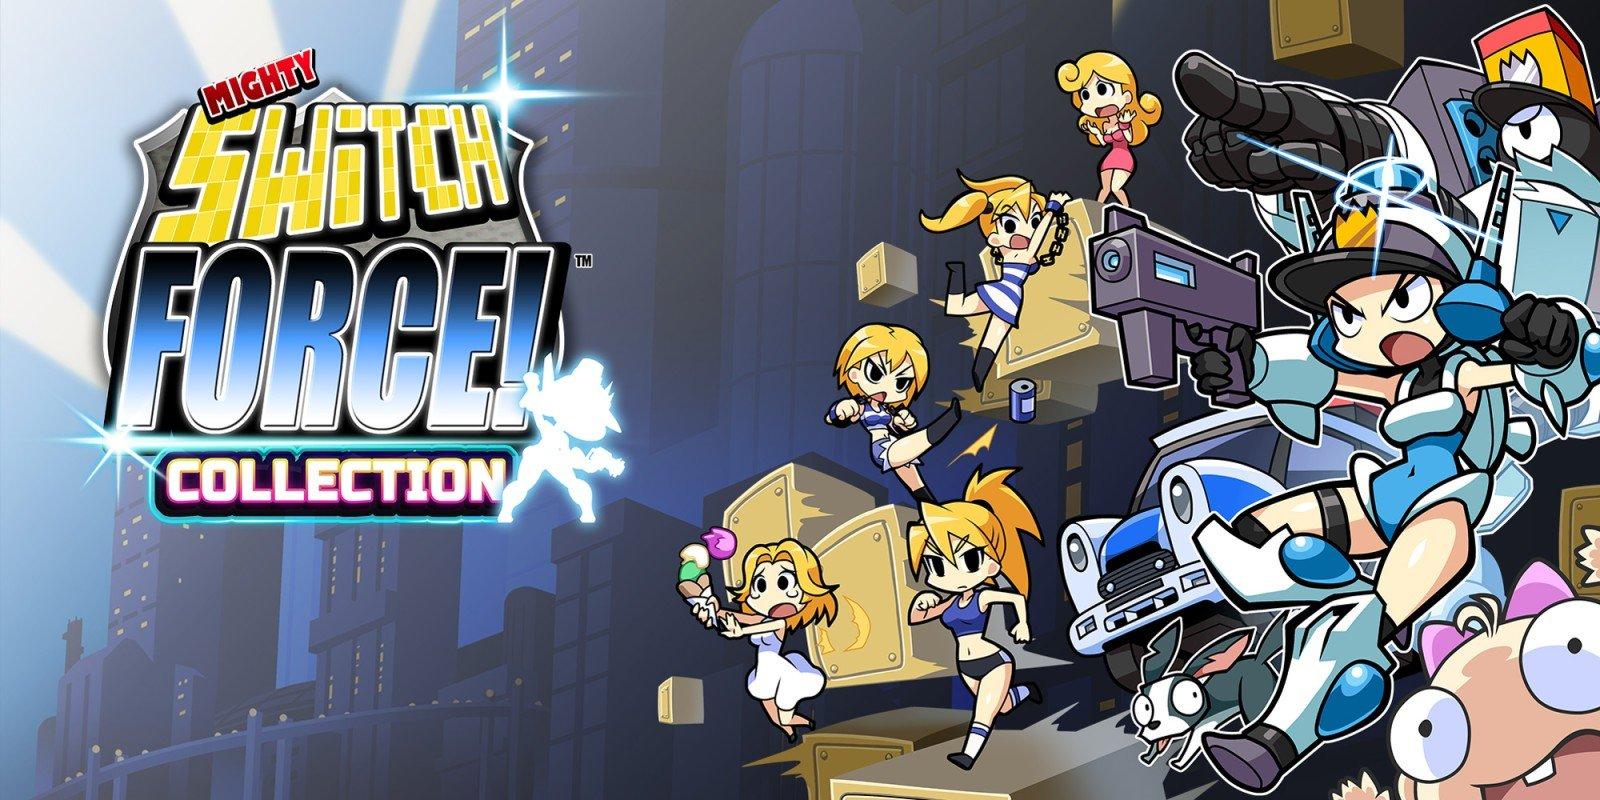 Mighty Switch Force! Collection- Nintendo Switch